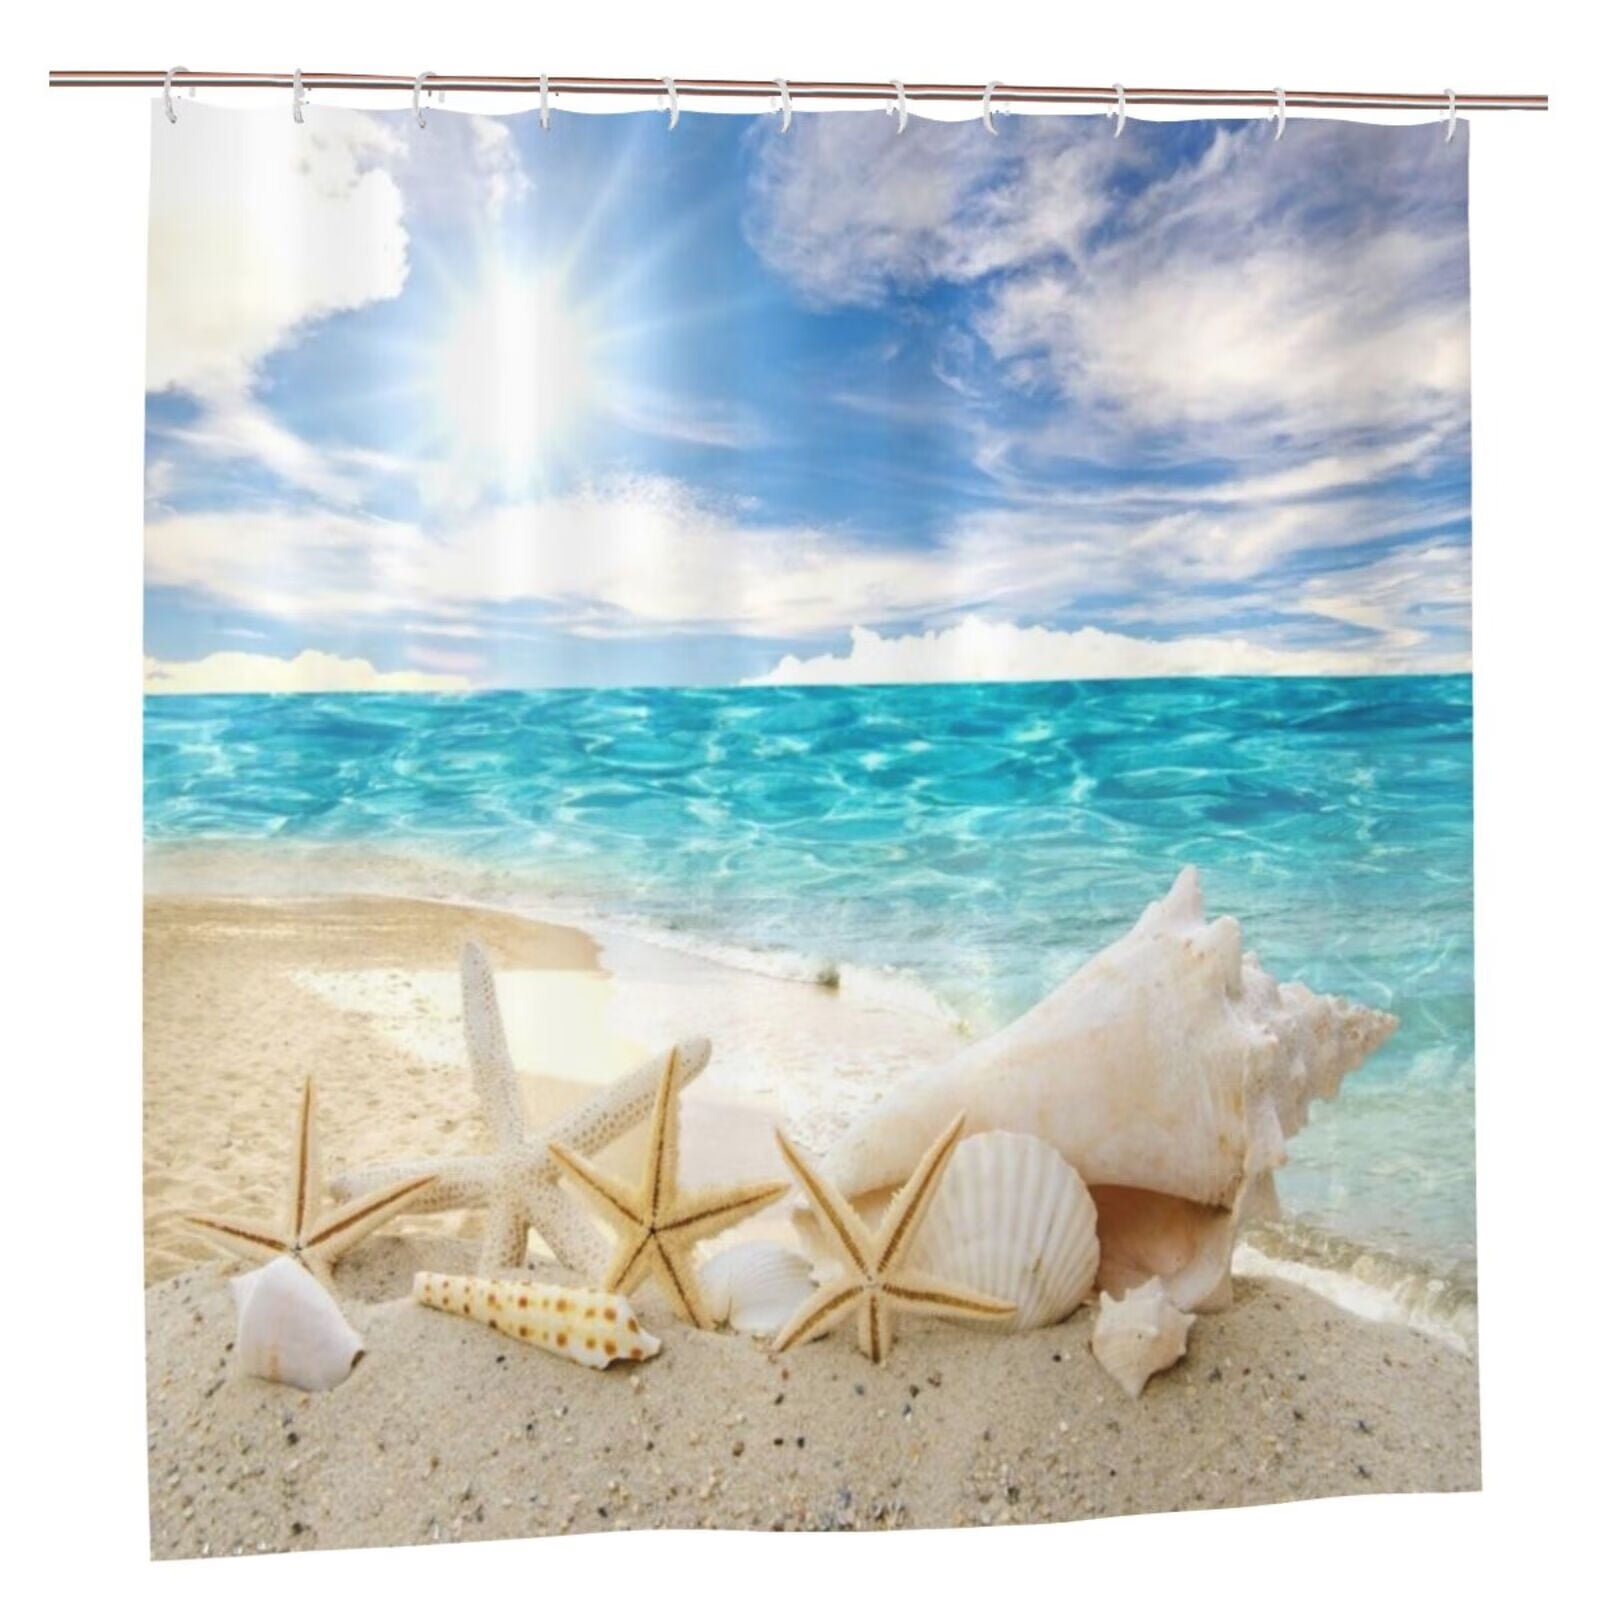 12-Pack Of Beach-Themed Shower Curtain Stainless Steel Hooks